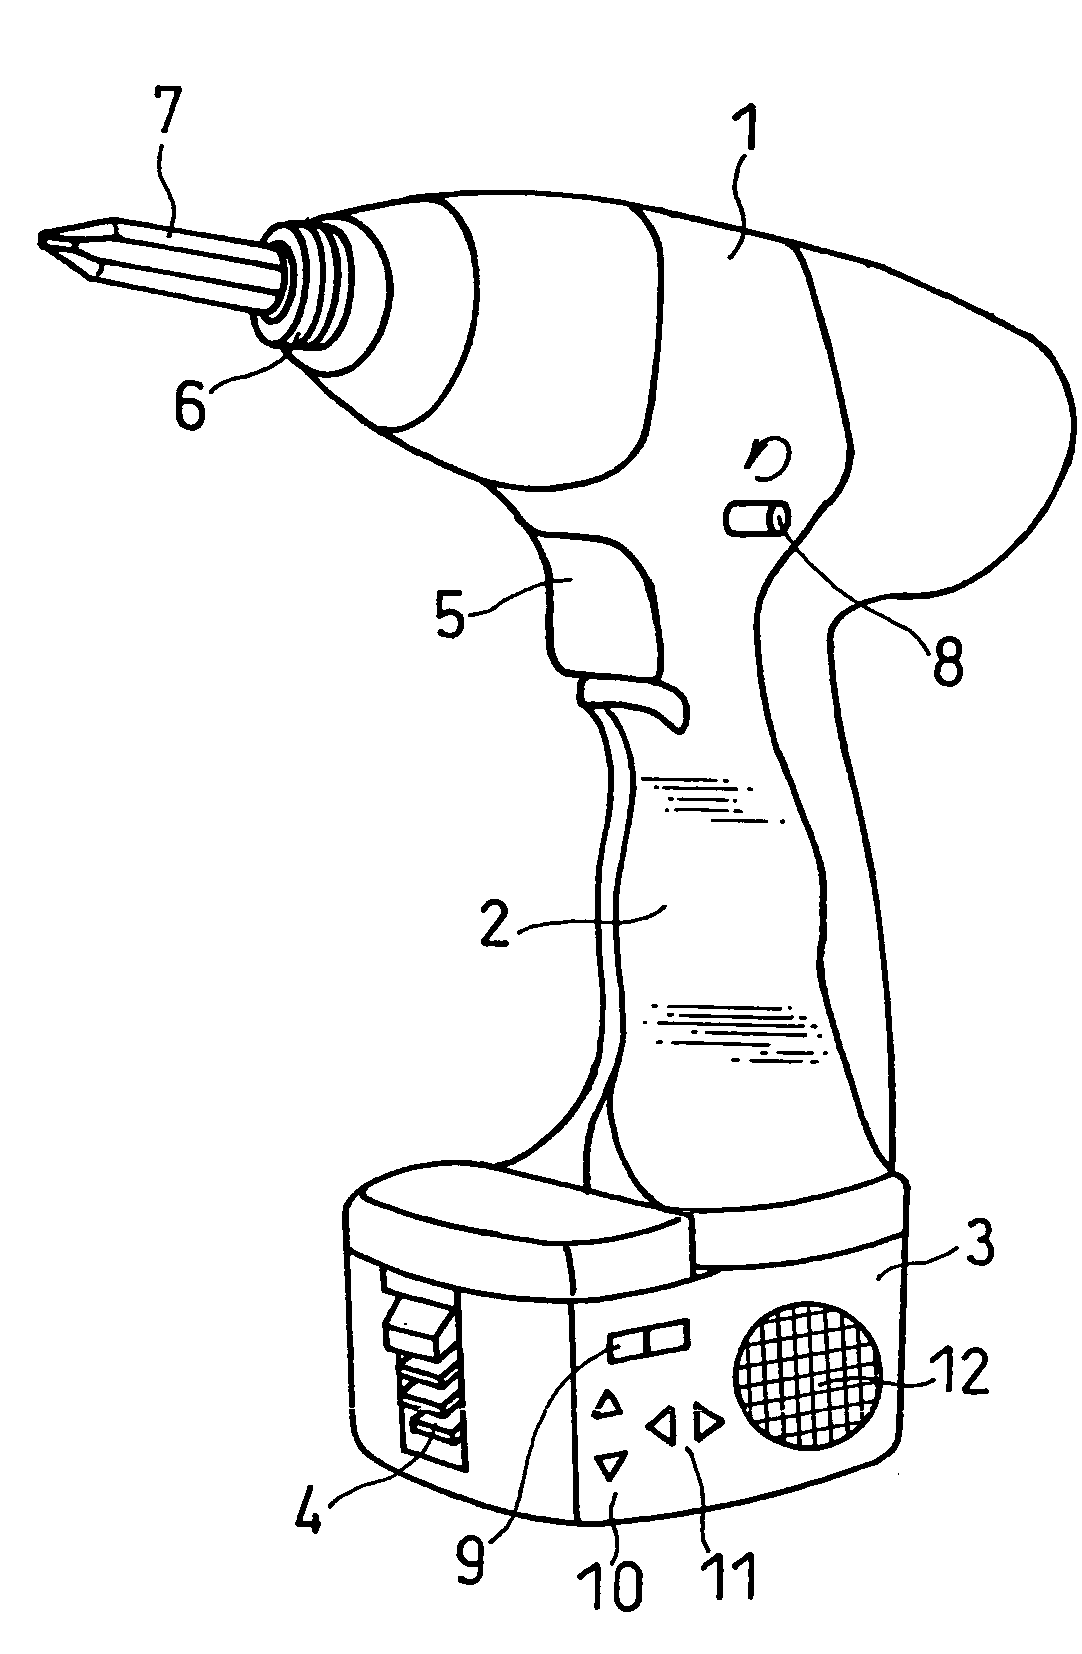 Power tool with additional function